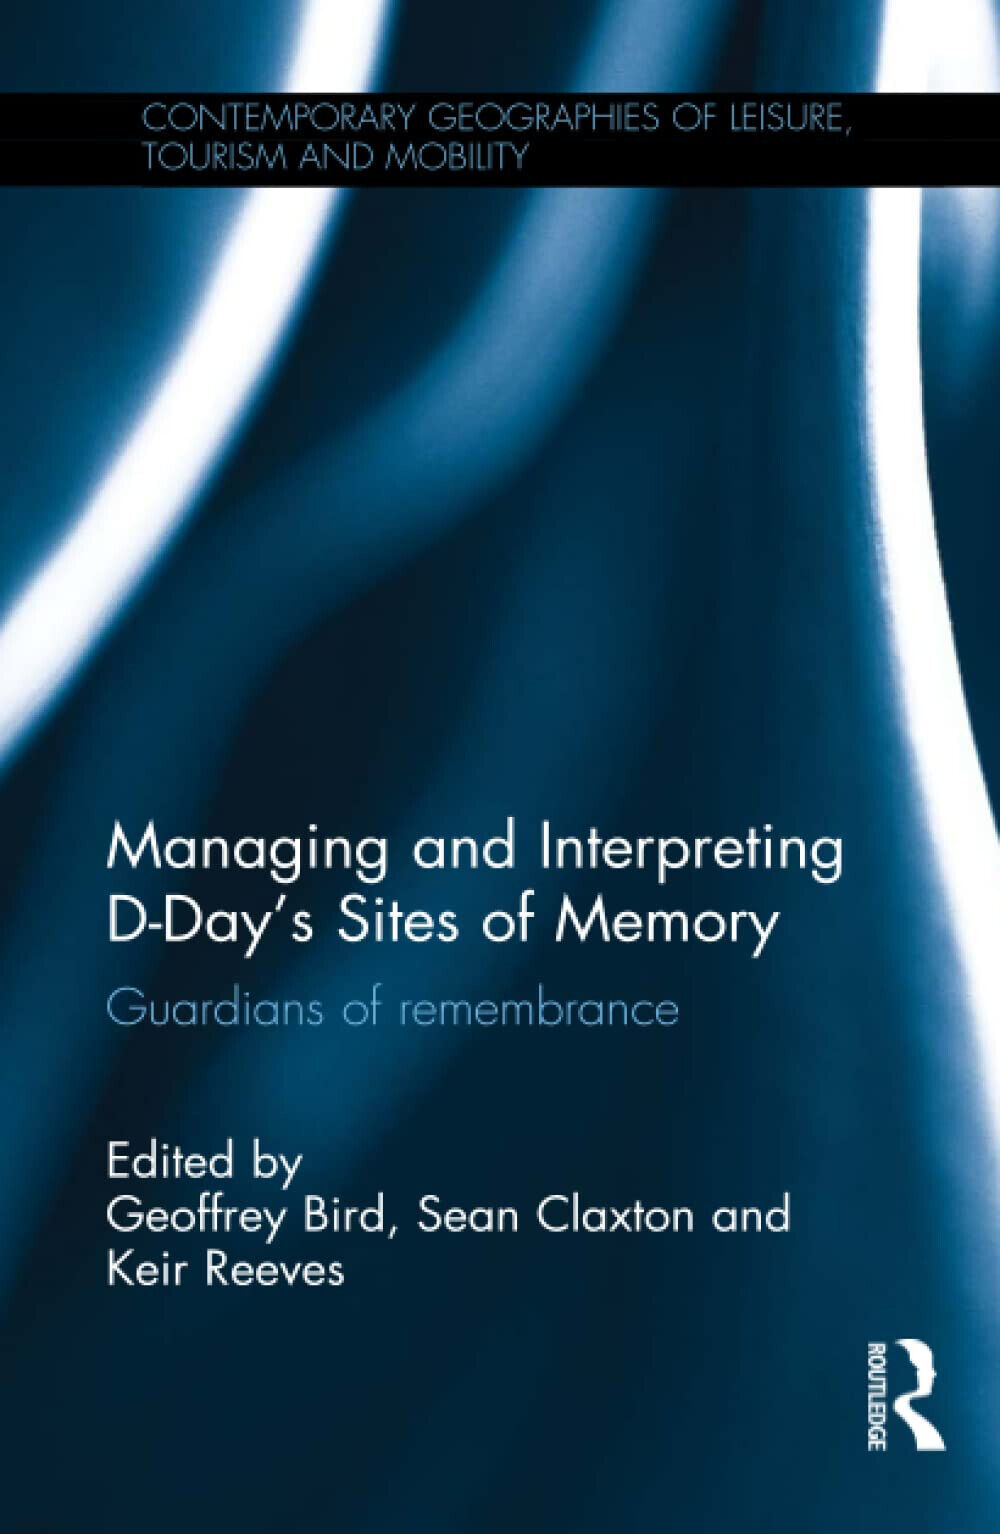 Managing and Interpreting D-Day s Sites of Memory - Geoffrey Bird - 2016 libro usato